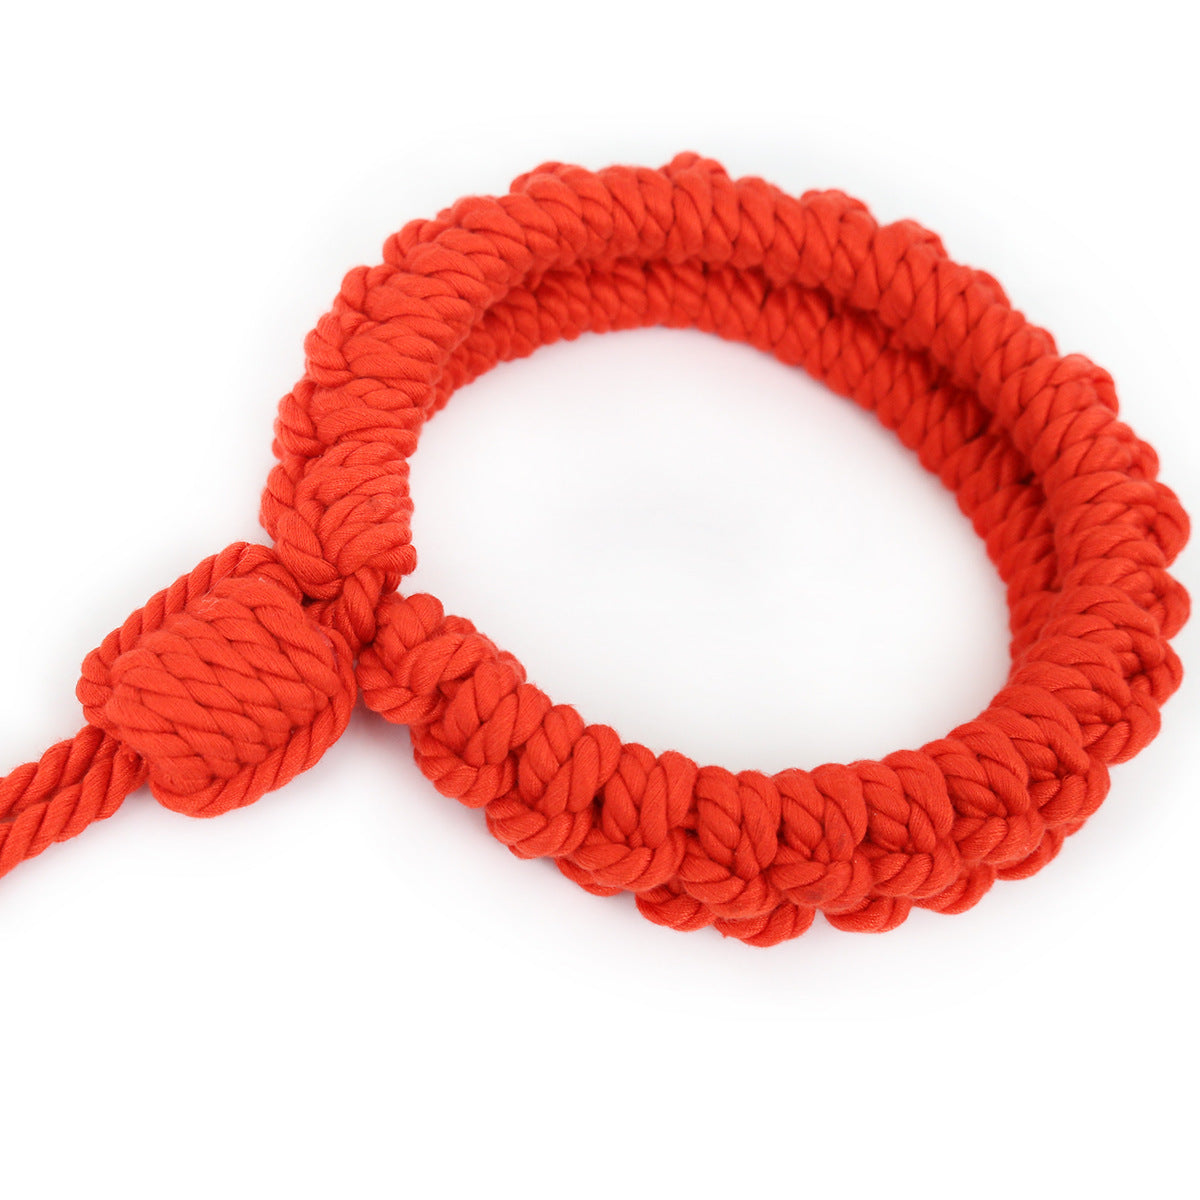 Collar Bundled With Cotton And Hemp Rope Performance Props